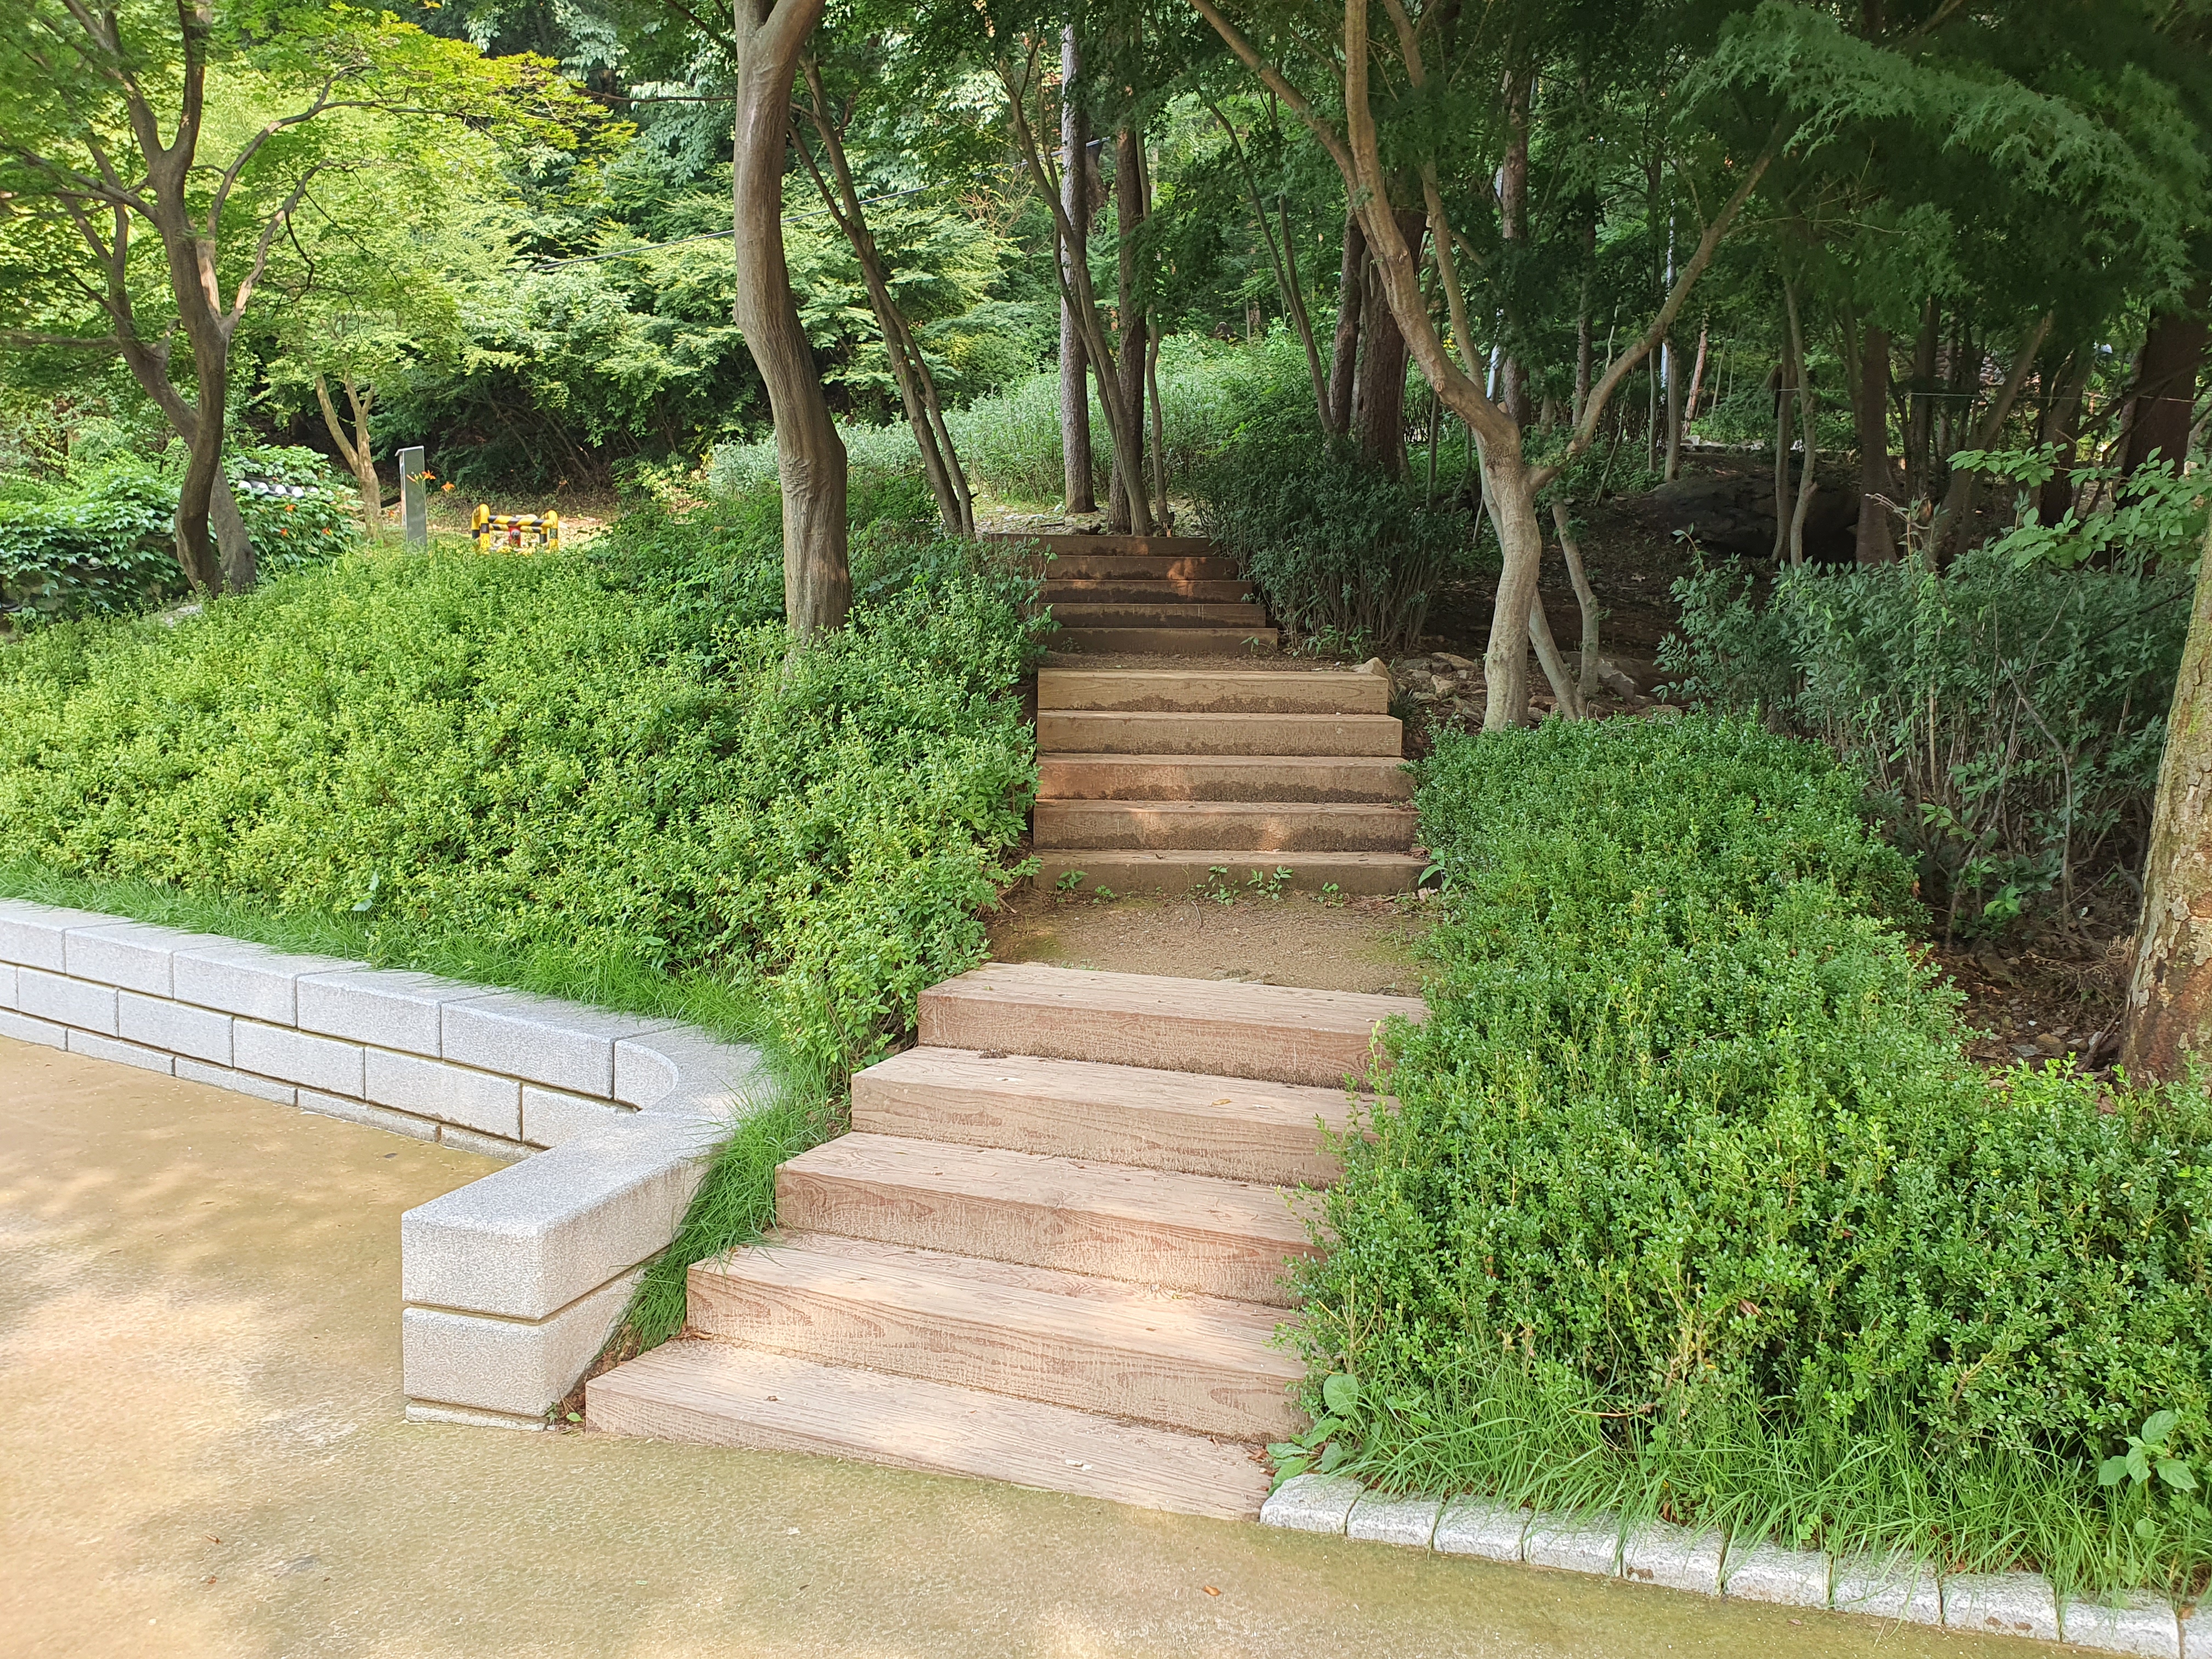 Entryway and Main entrance0 : Entryway to Nakseongdae Park that has stairways